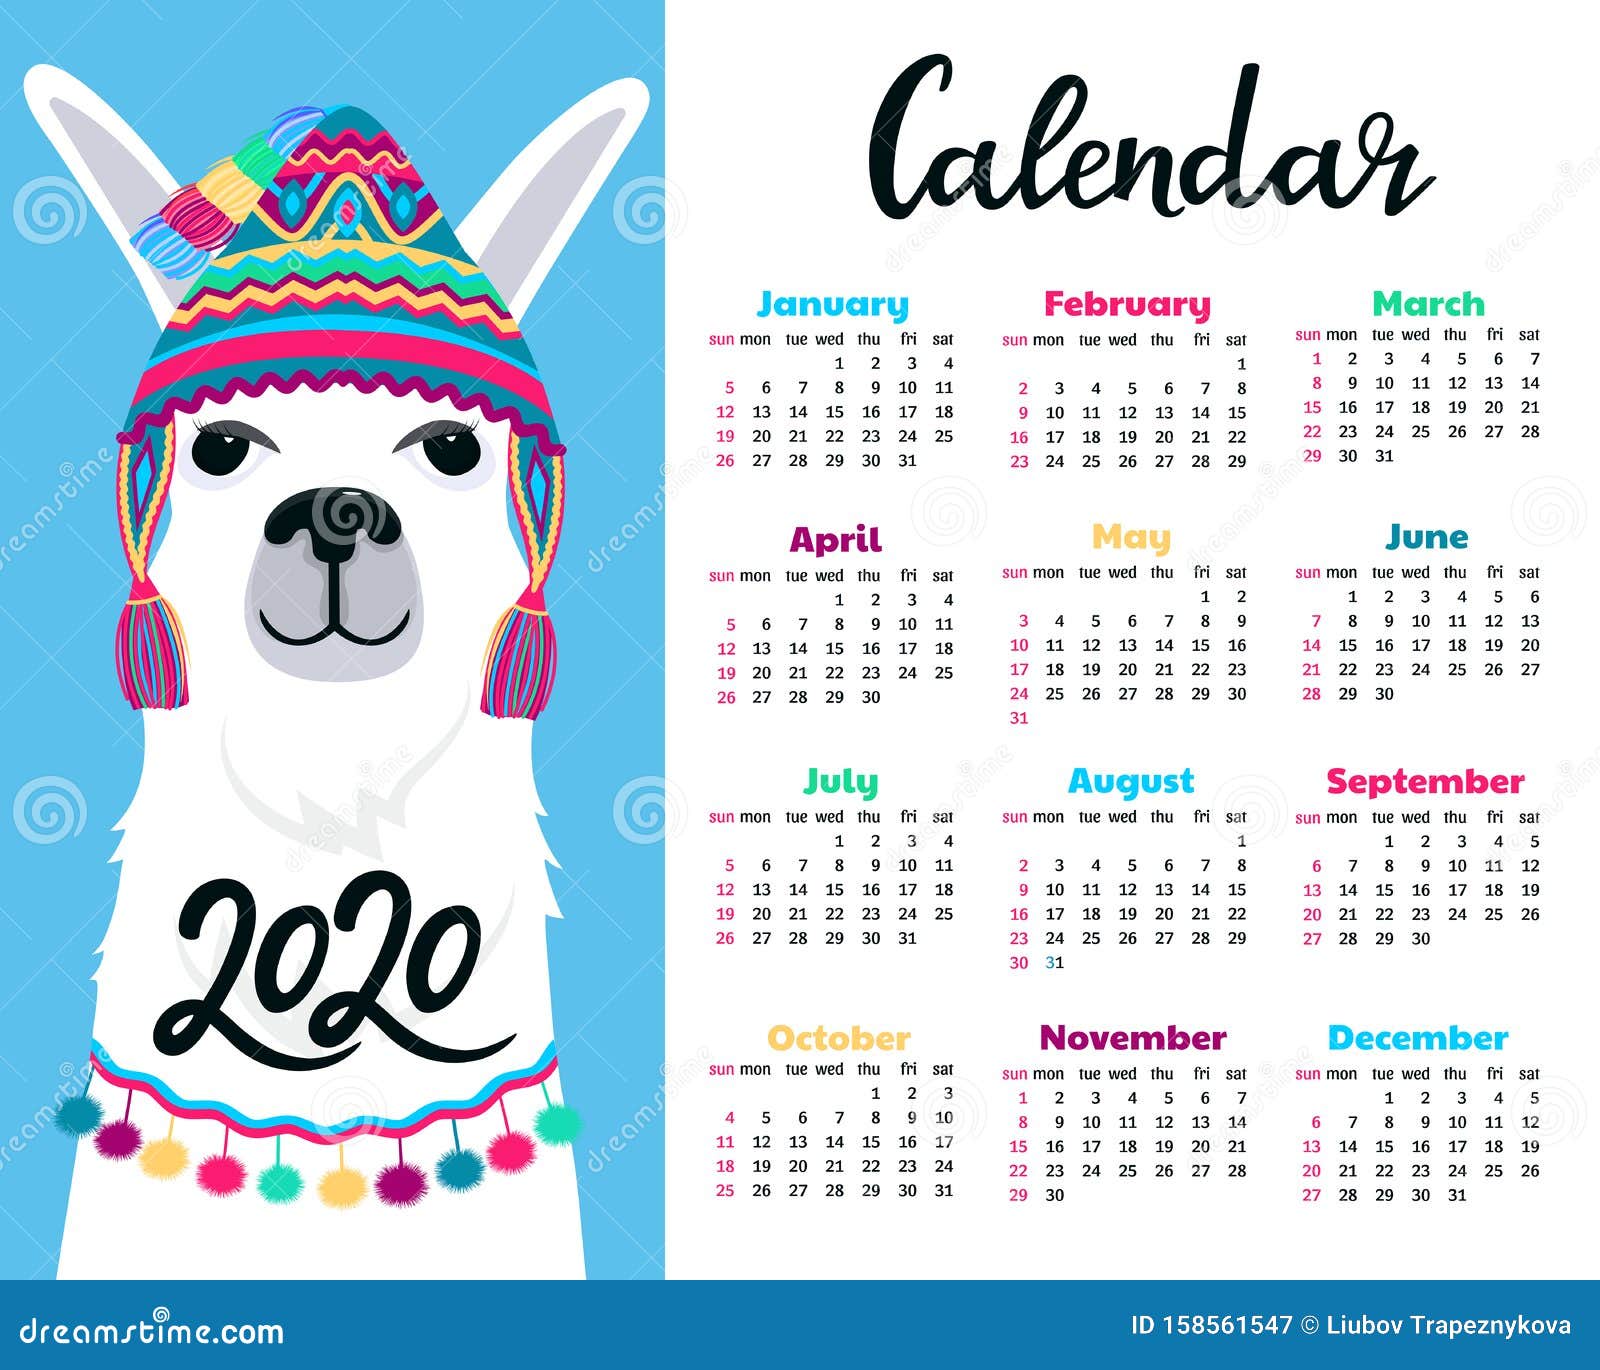 Calendar for 2020 from Sunday To Saturday. Cute Llama in Funny Hat with